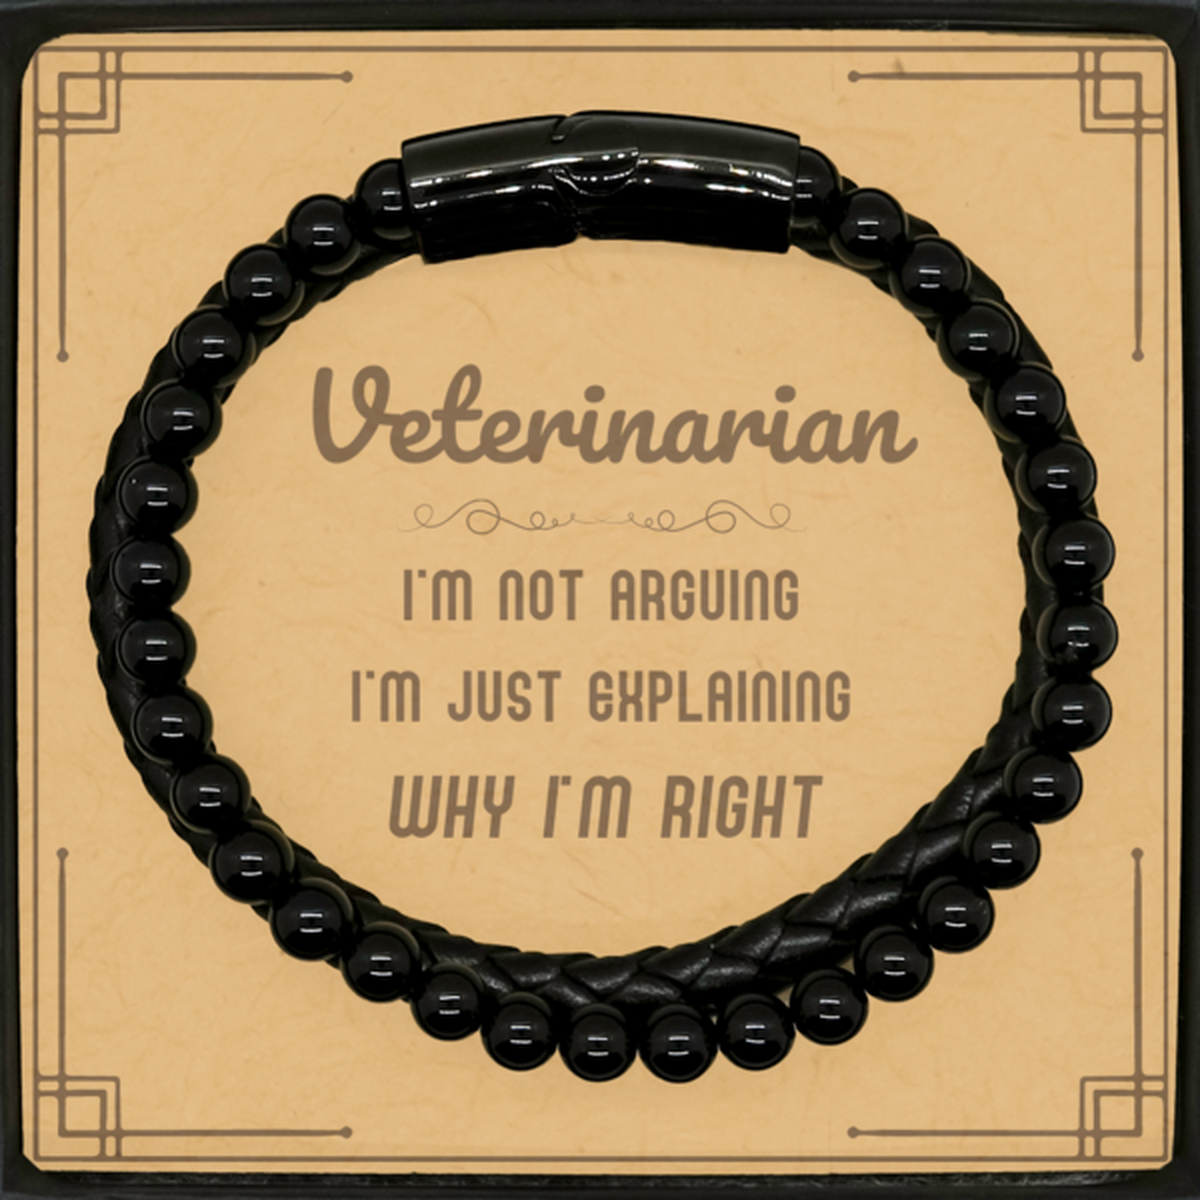 Veterinarian I'm not Arguing. I'm Just Explaining Why I'm RIGHT Stone Leather Bracelets, Funny Saying Quote Veterinarian Gifts For Veterinarian Message Card Graduation Birthday Christmas Gifts for Men Women Coworker